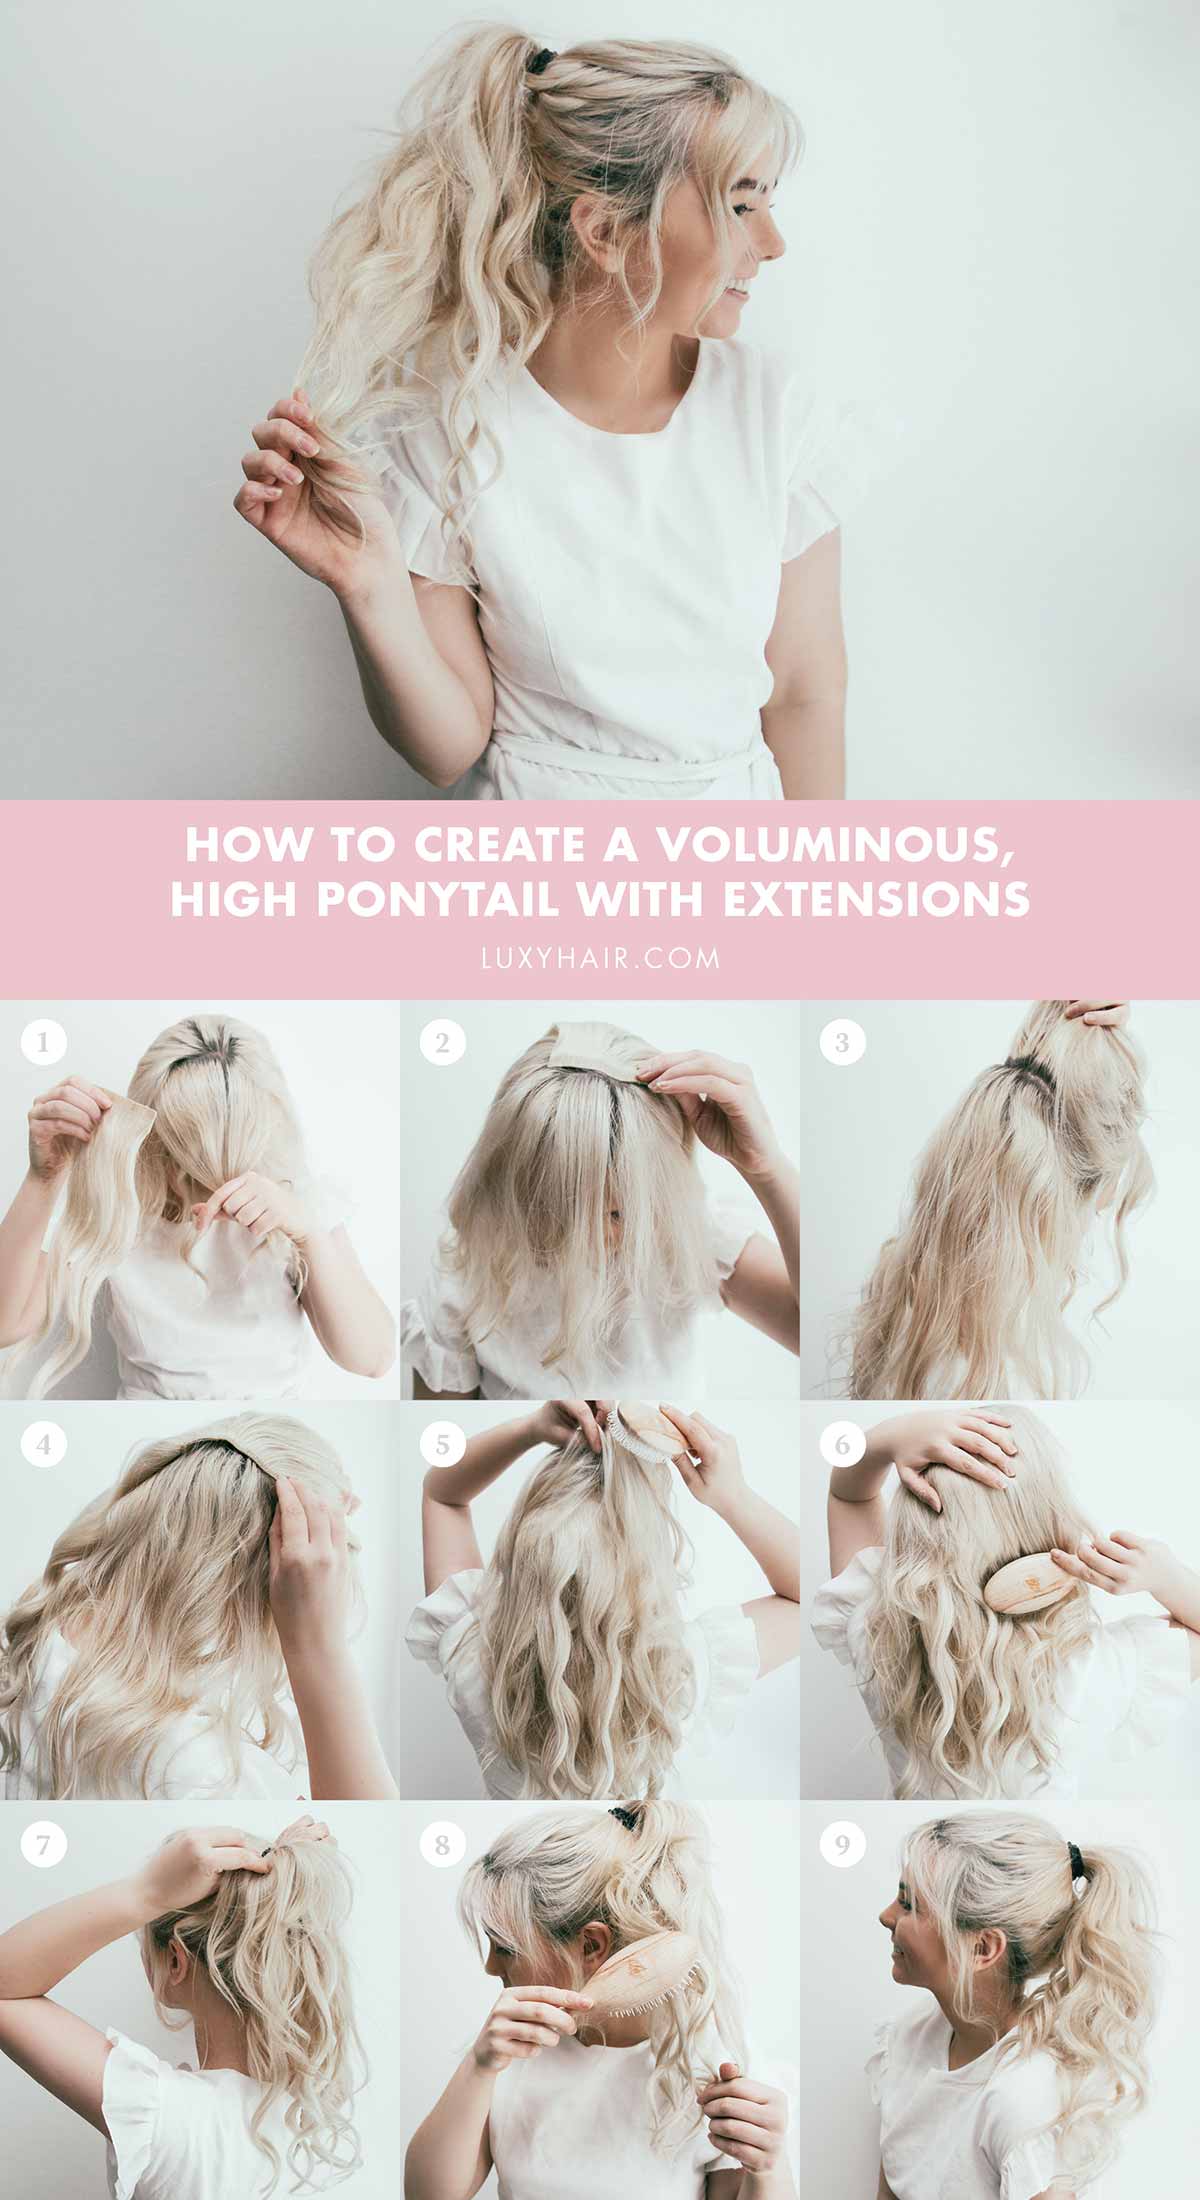 Ponytails with hair extensions